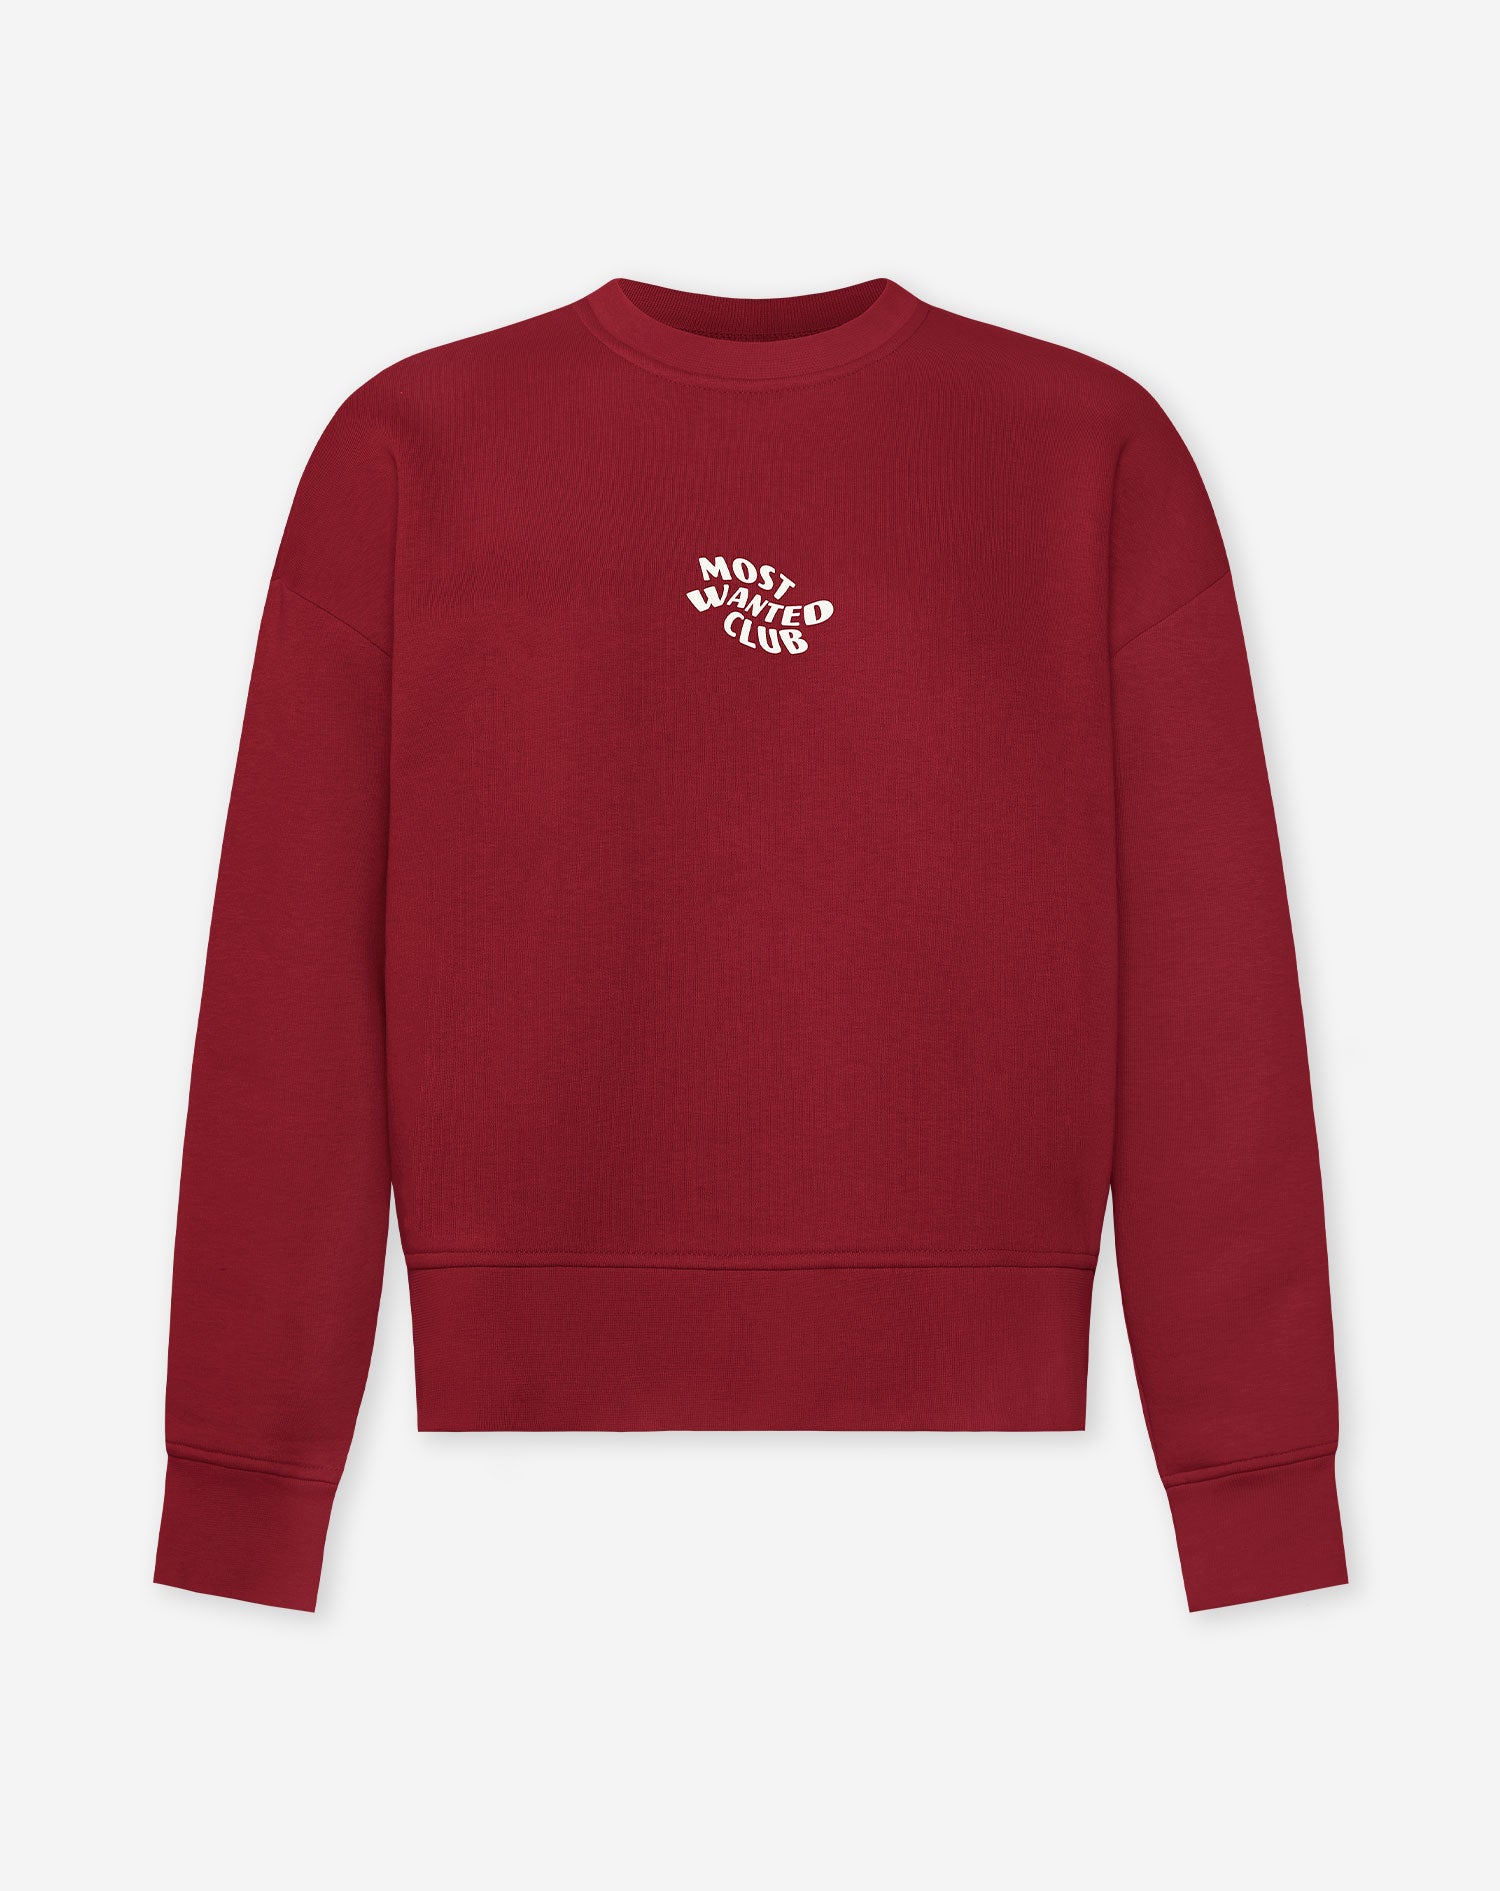 MOST WANTED CLUB SWEATER RED